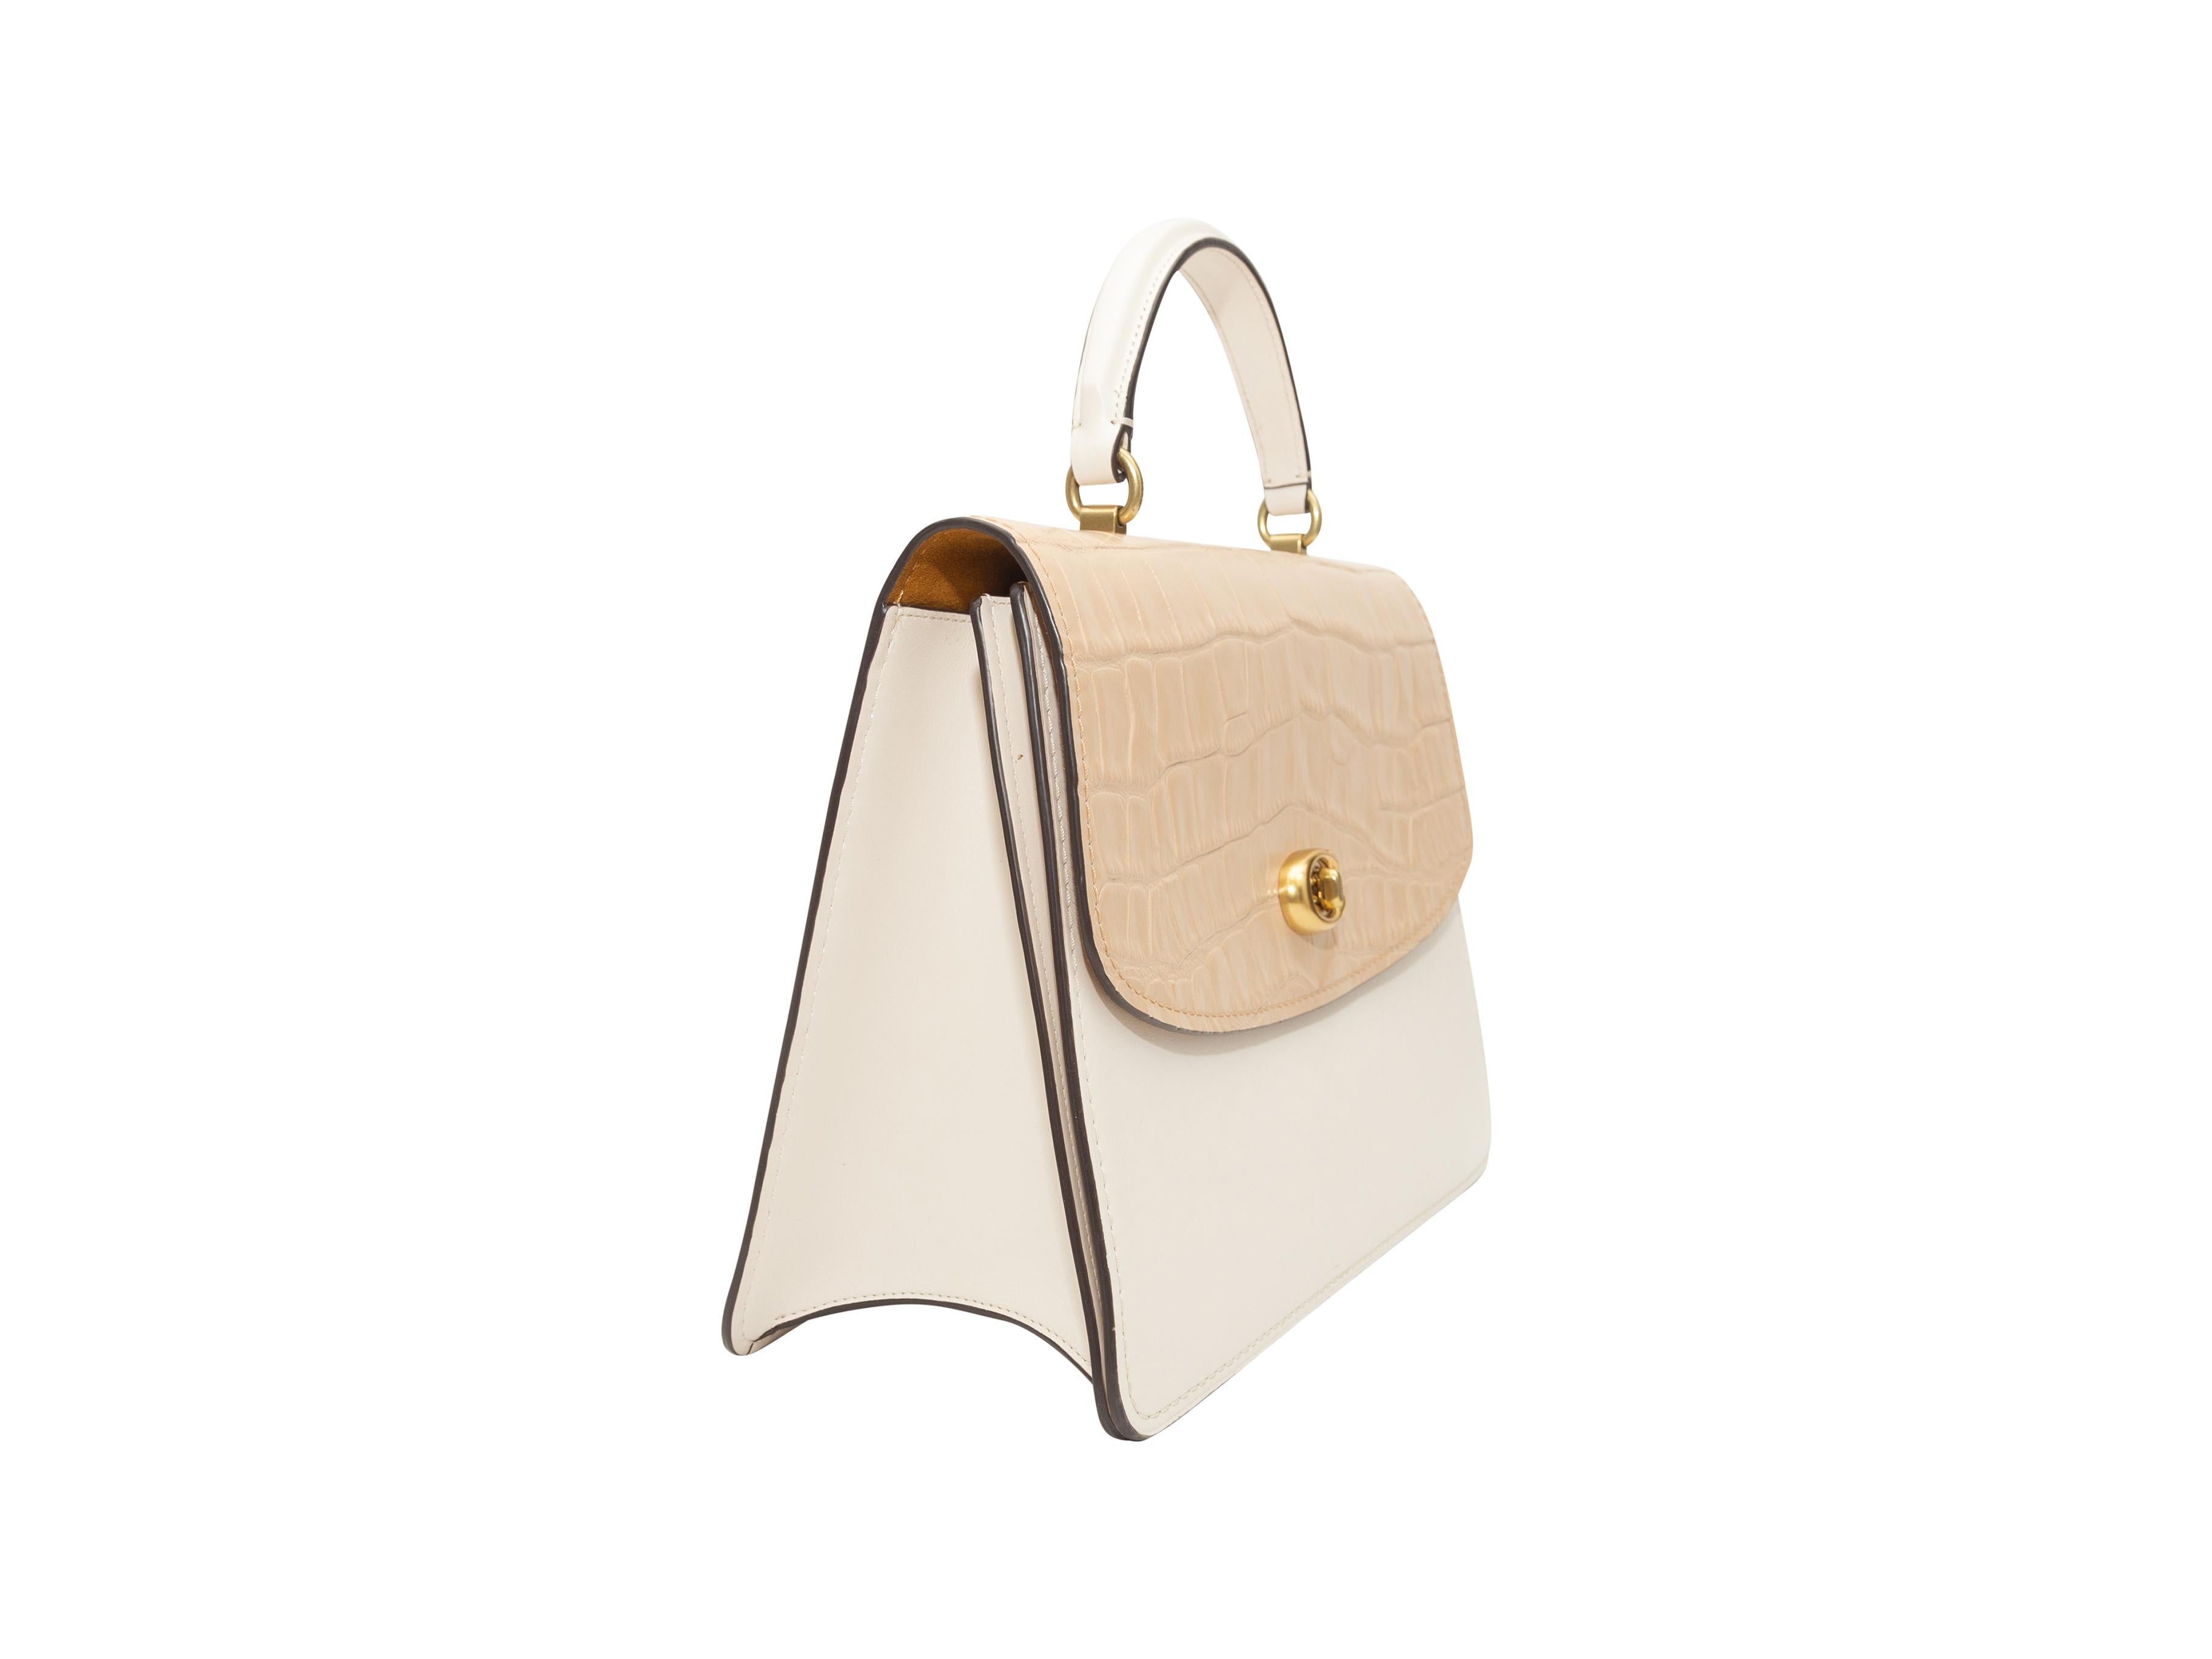 Product details: White and cream leather and suede flap bag by Coach. Gold-tone hardware. Yellow suede interior. Interior zip pocket. Single top handle. Optional shoulder strap. 11.5